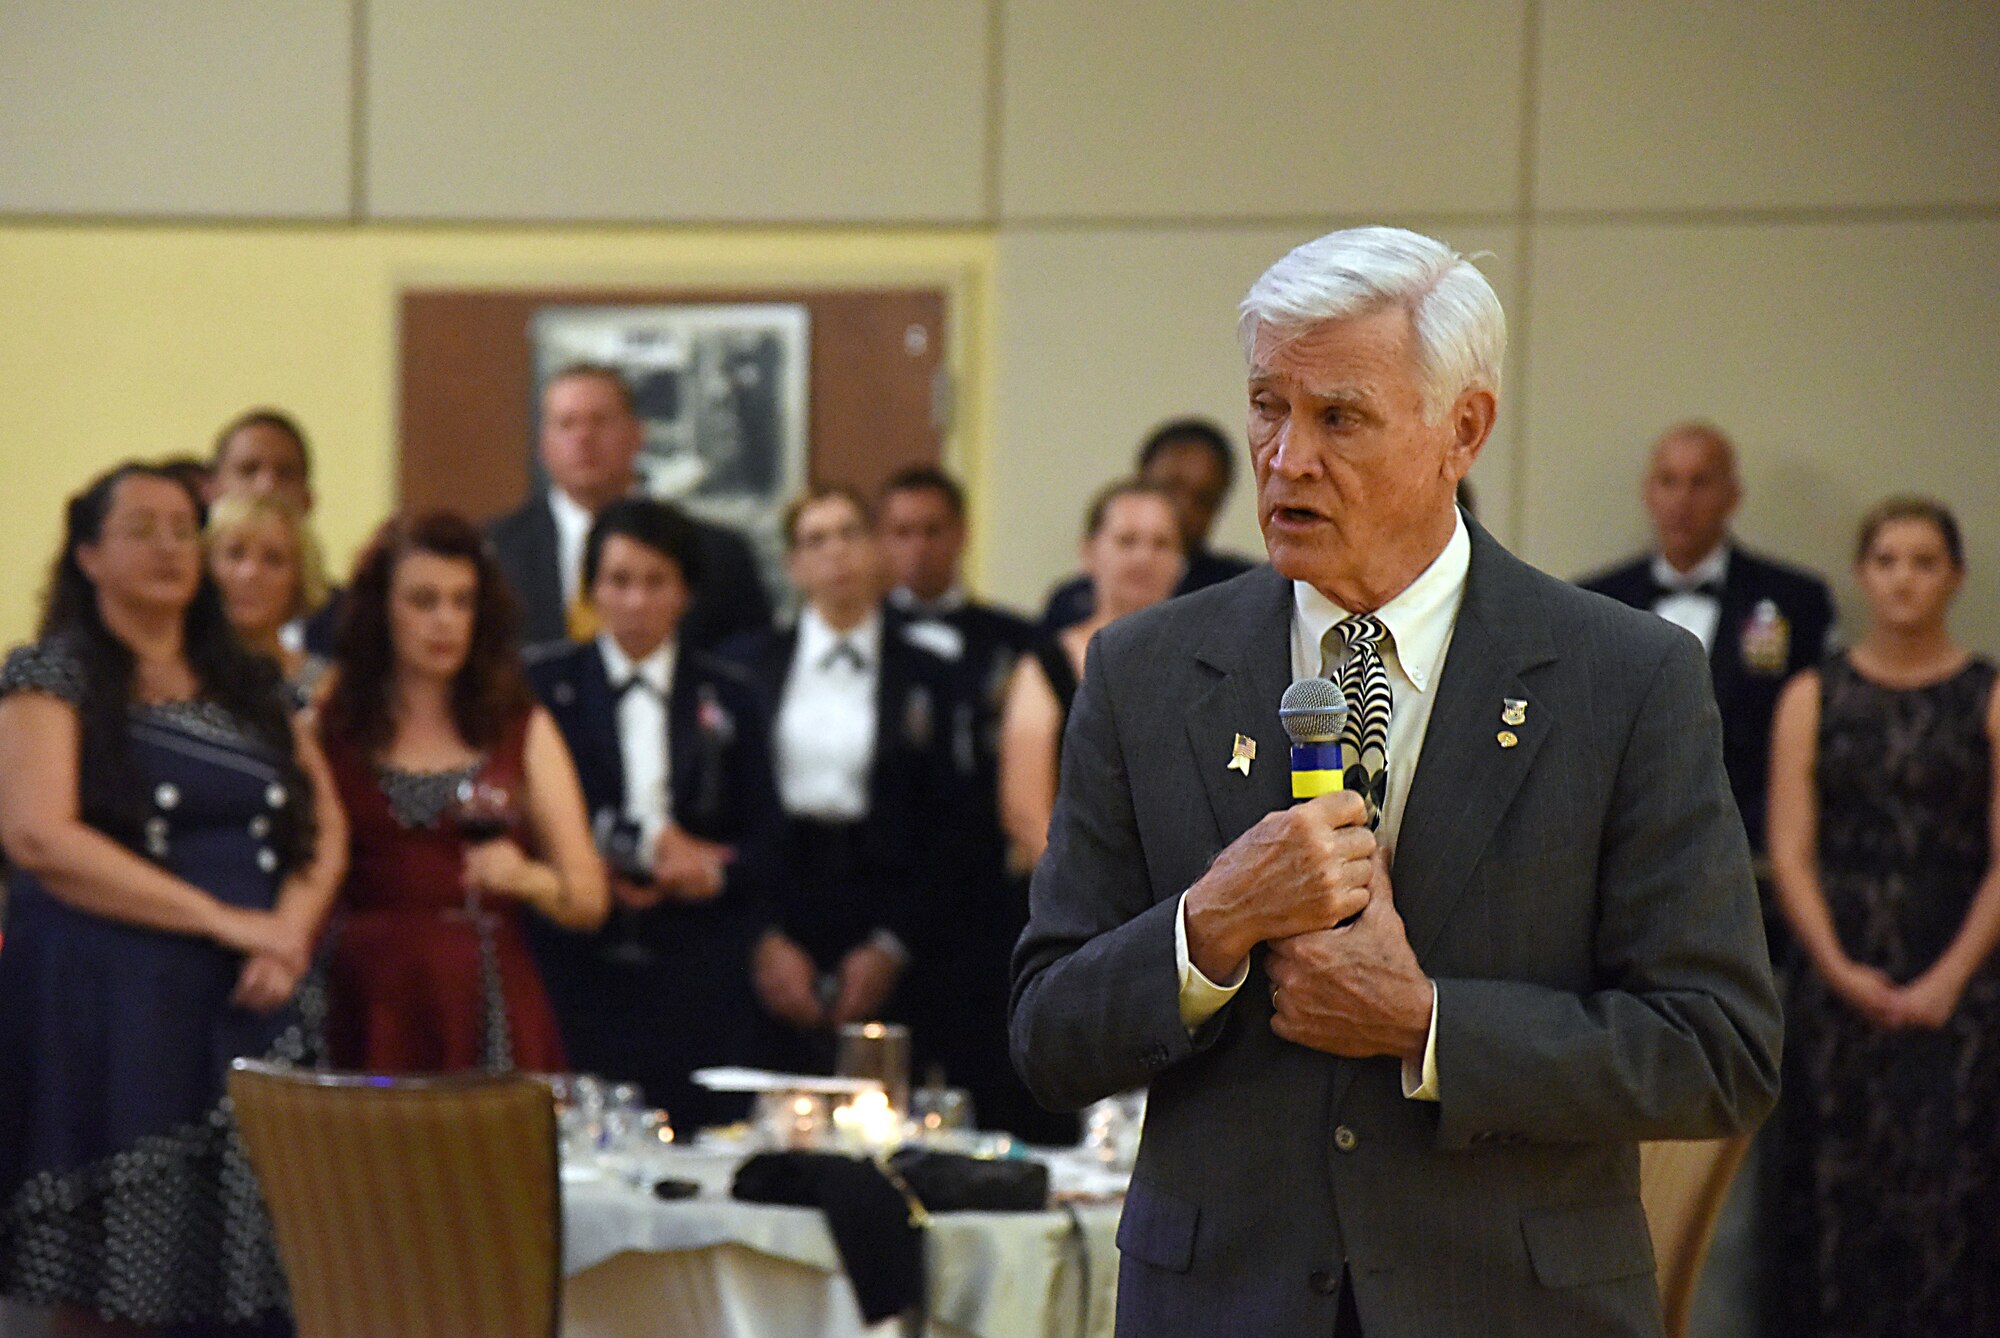 Retired Lt. Col. Barry Bridger, former Vietnam prisoner of war, delivers remarks during the U.S. Air Force 70th Birthday Ball at the Bay Breeze Event Center Sept. 16, 2017, on Keesler Air Force Base, Mississippi. The event, hosted by the 81st Training Wing and the John C. Stennis Chapter of the Air Force Association, also paid tribute to all prisoners of war and military members still missing in action. (U.S. Air Force photo by Kemberly Groue)